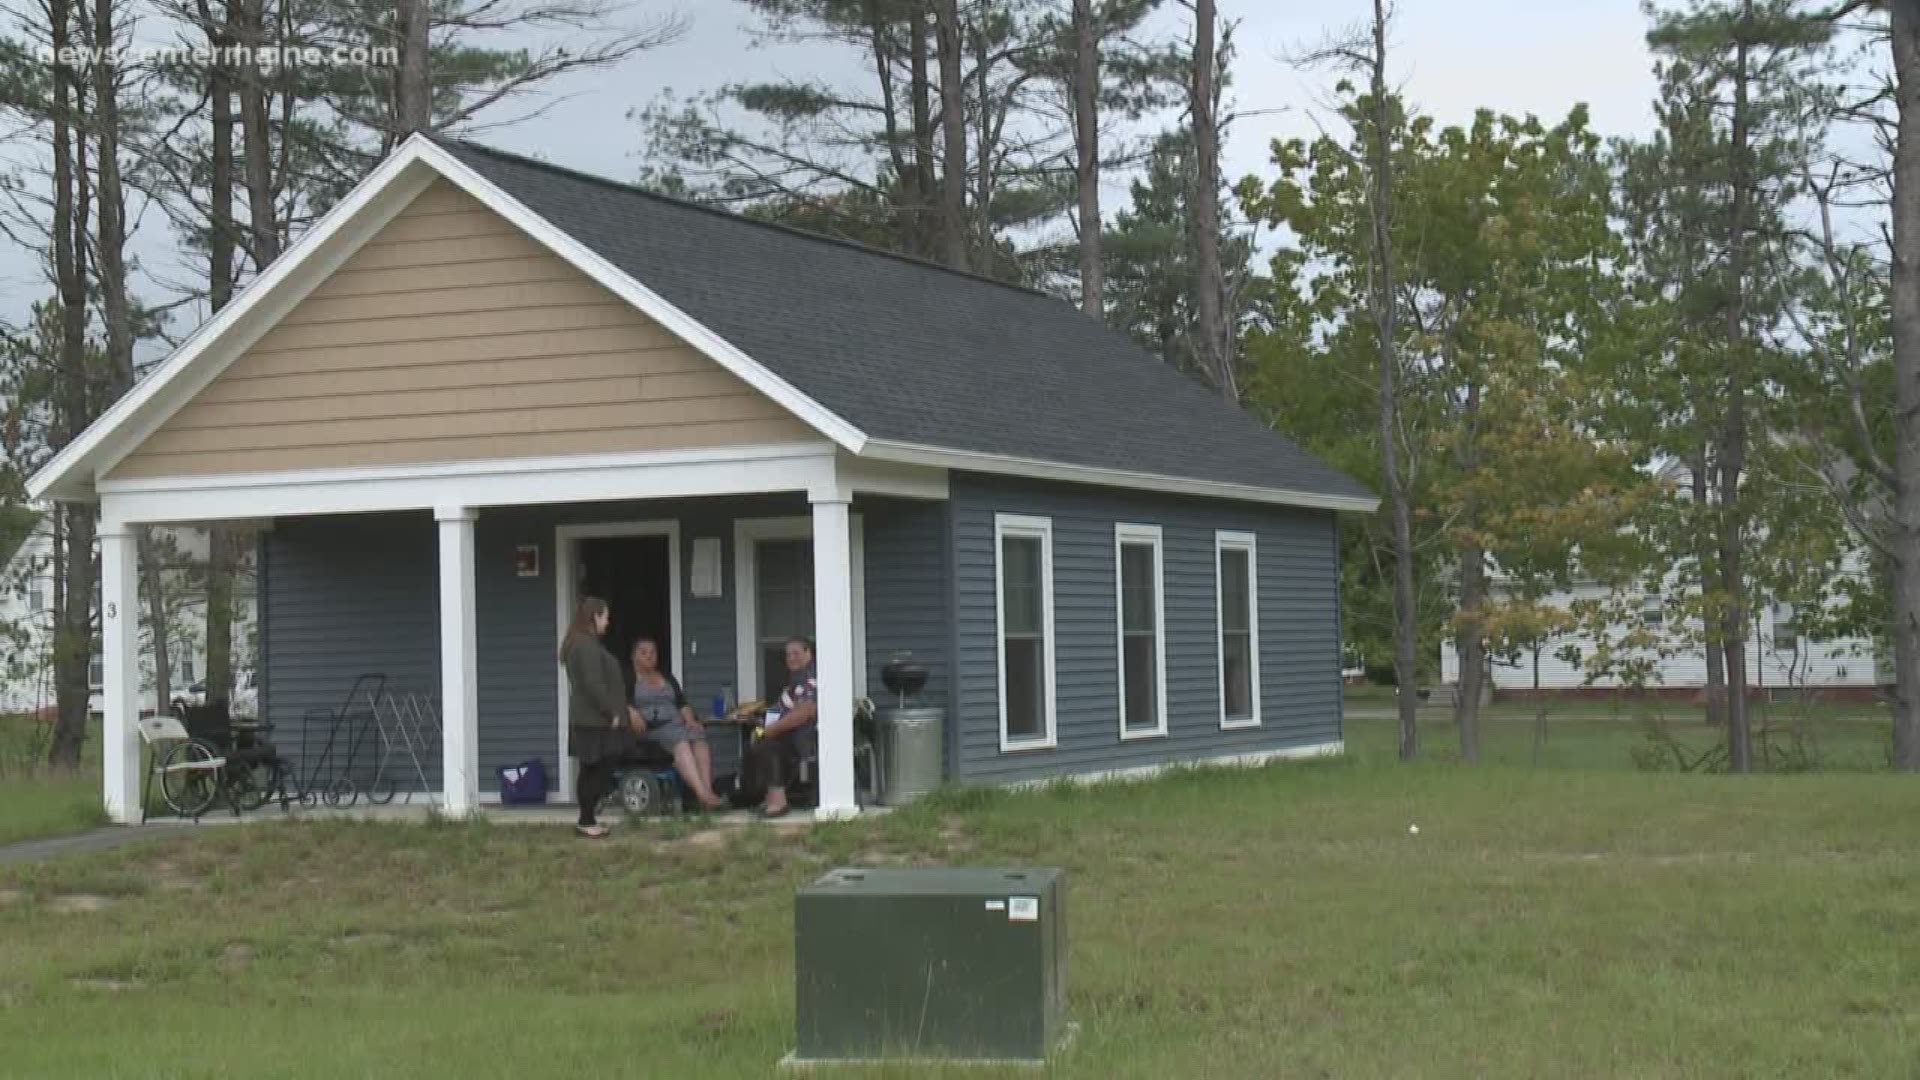 Cabin in the Woods project helps homeless vets